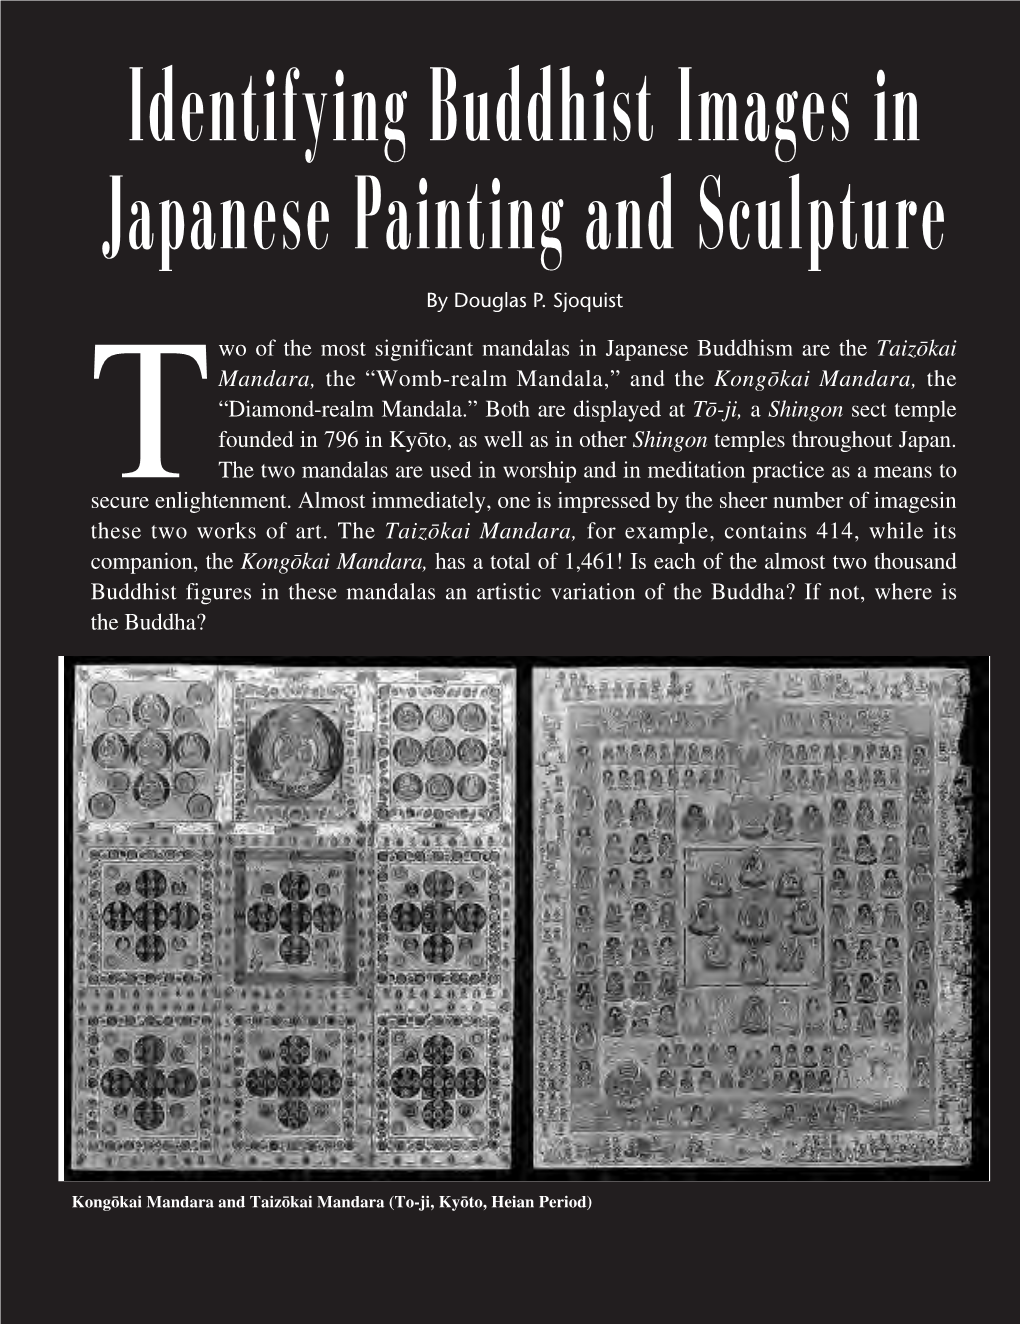 Identifying Buddhist Images in Japanese Painting and Sculpture